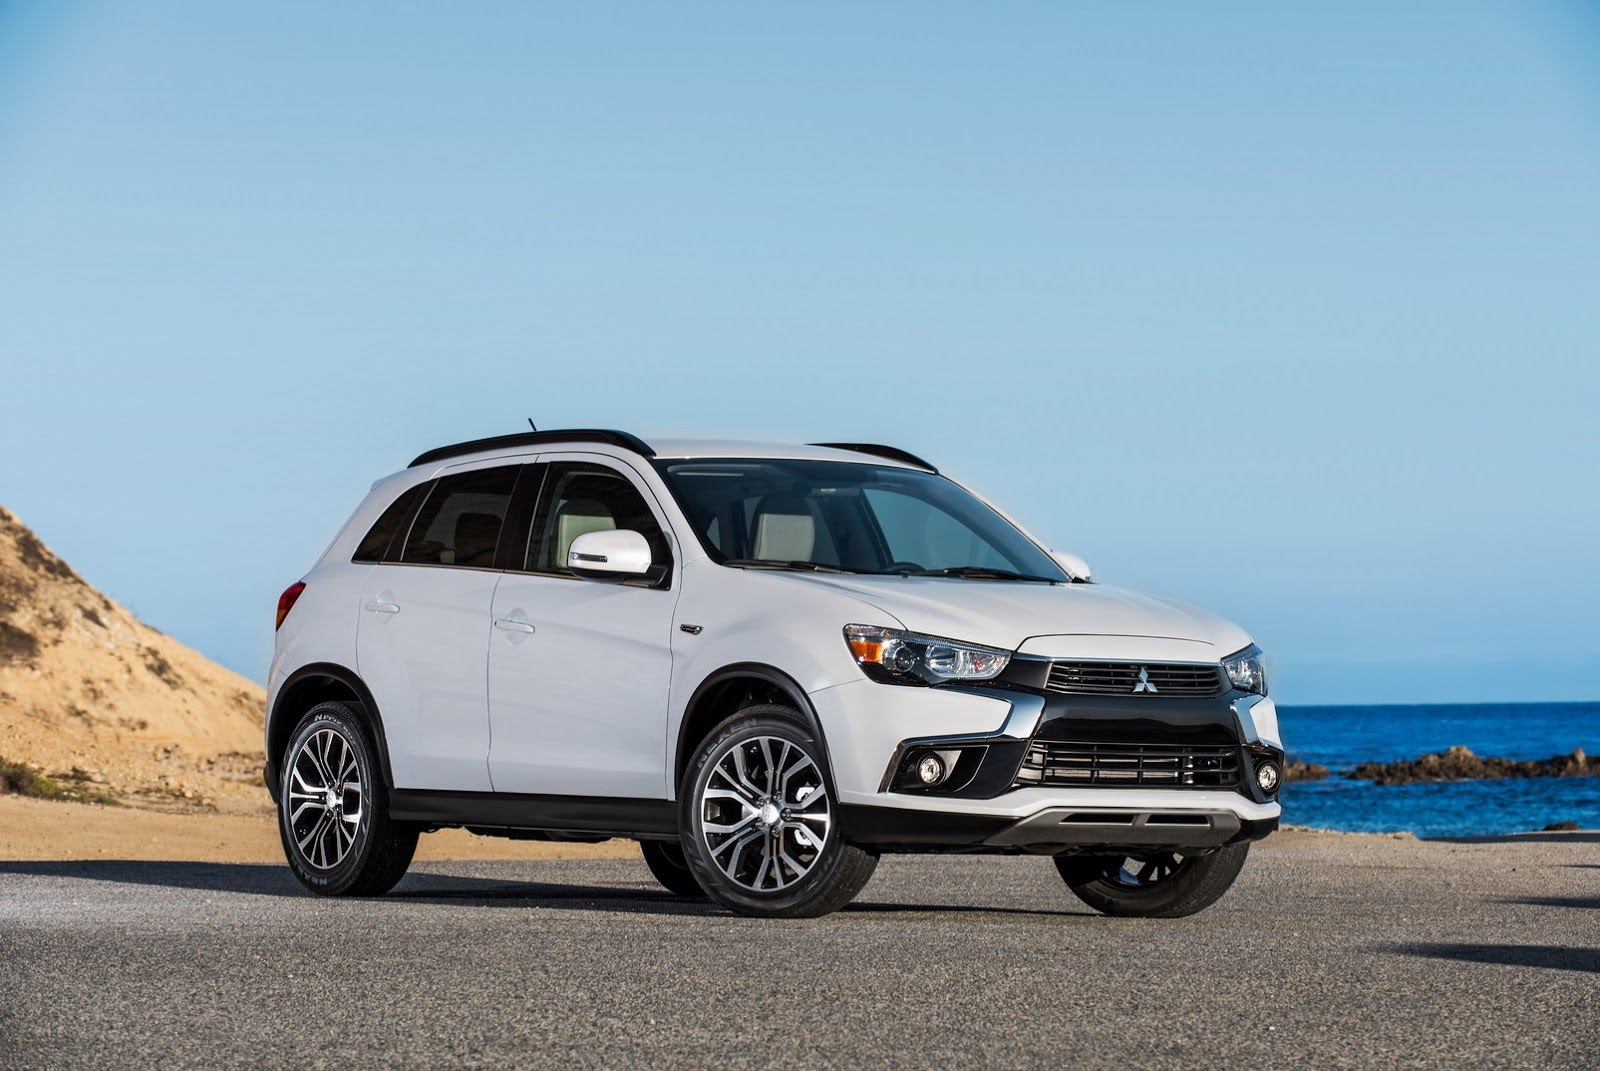 Difference Between the 2016 and 2017 Mitsubishi Outlander Sport